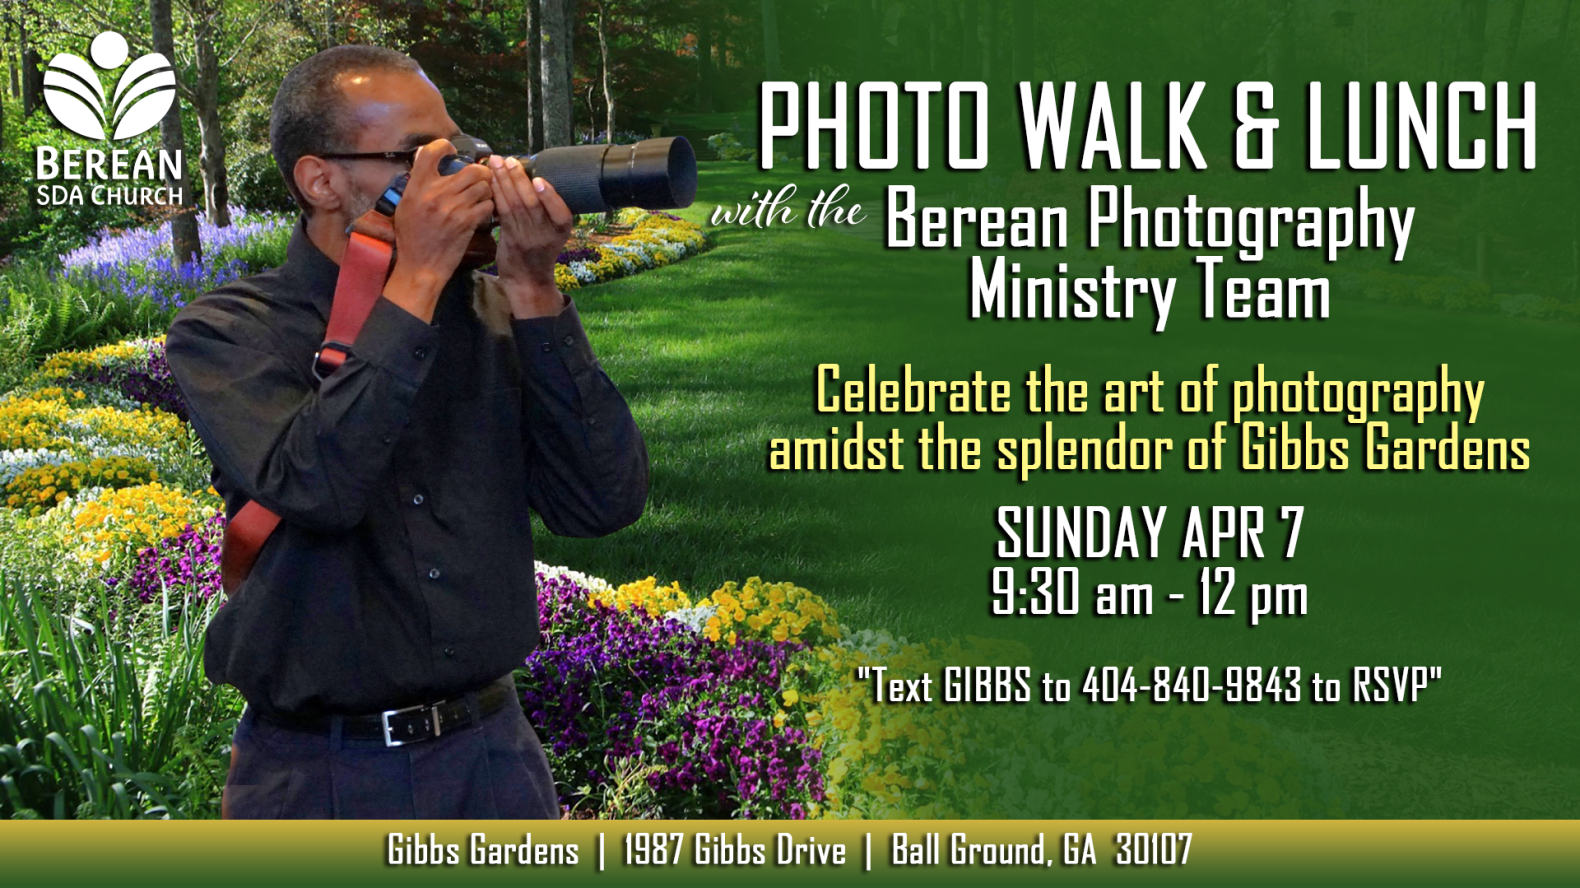 Photo Walk and Lunch | Gibbs Gardens | Sunday April 7th 9:30 am - 12 pm